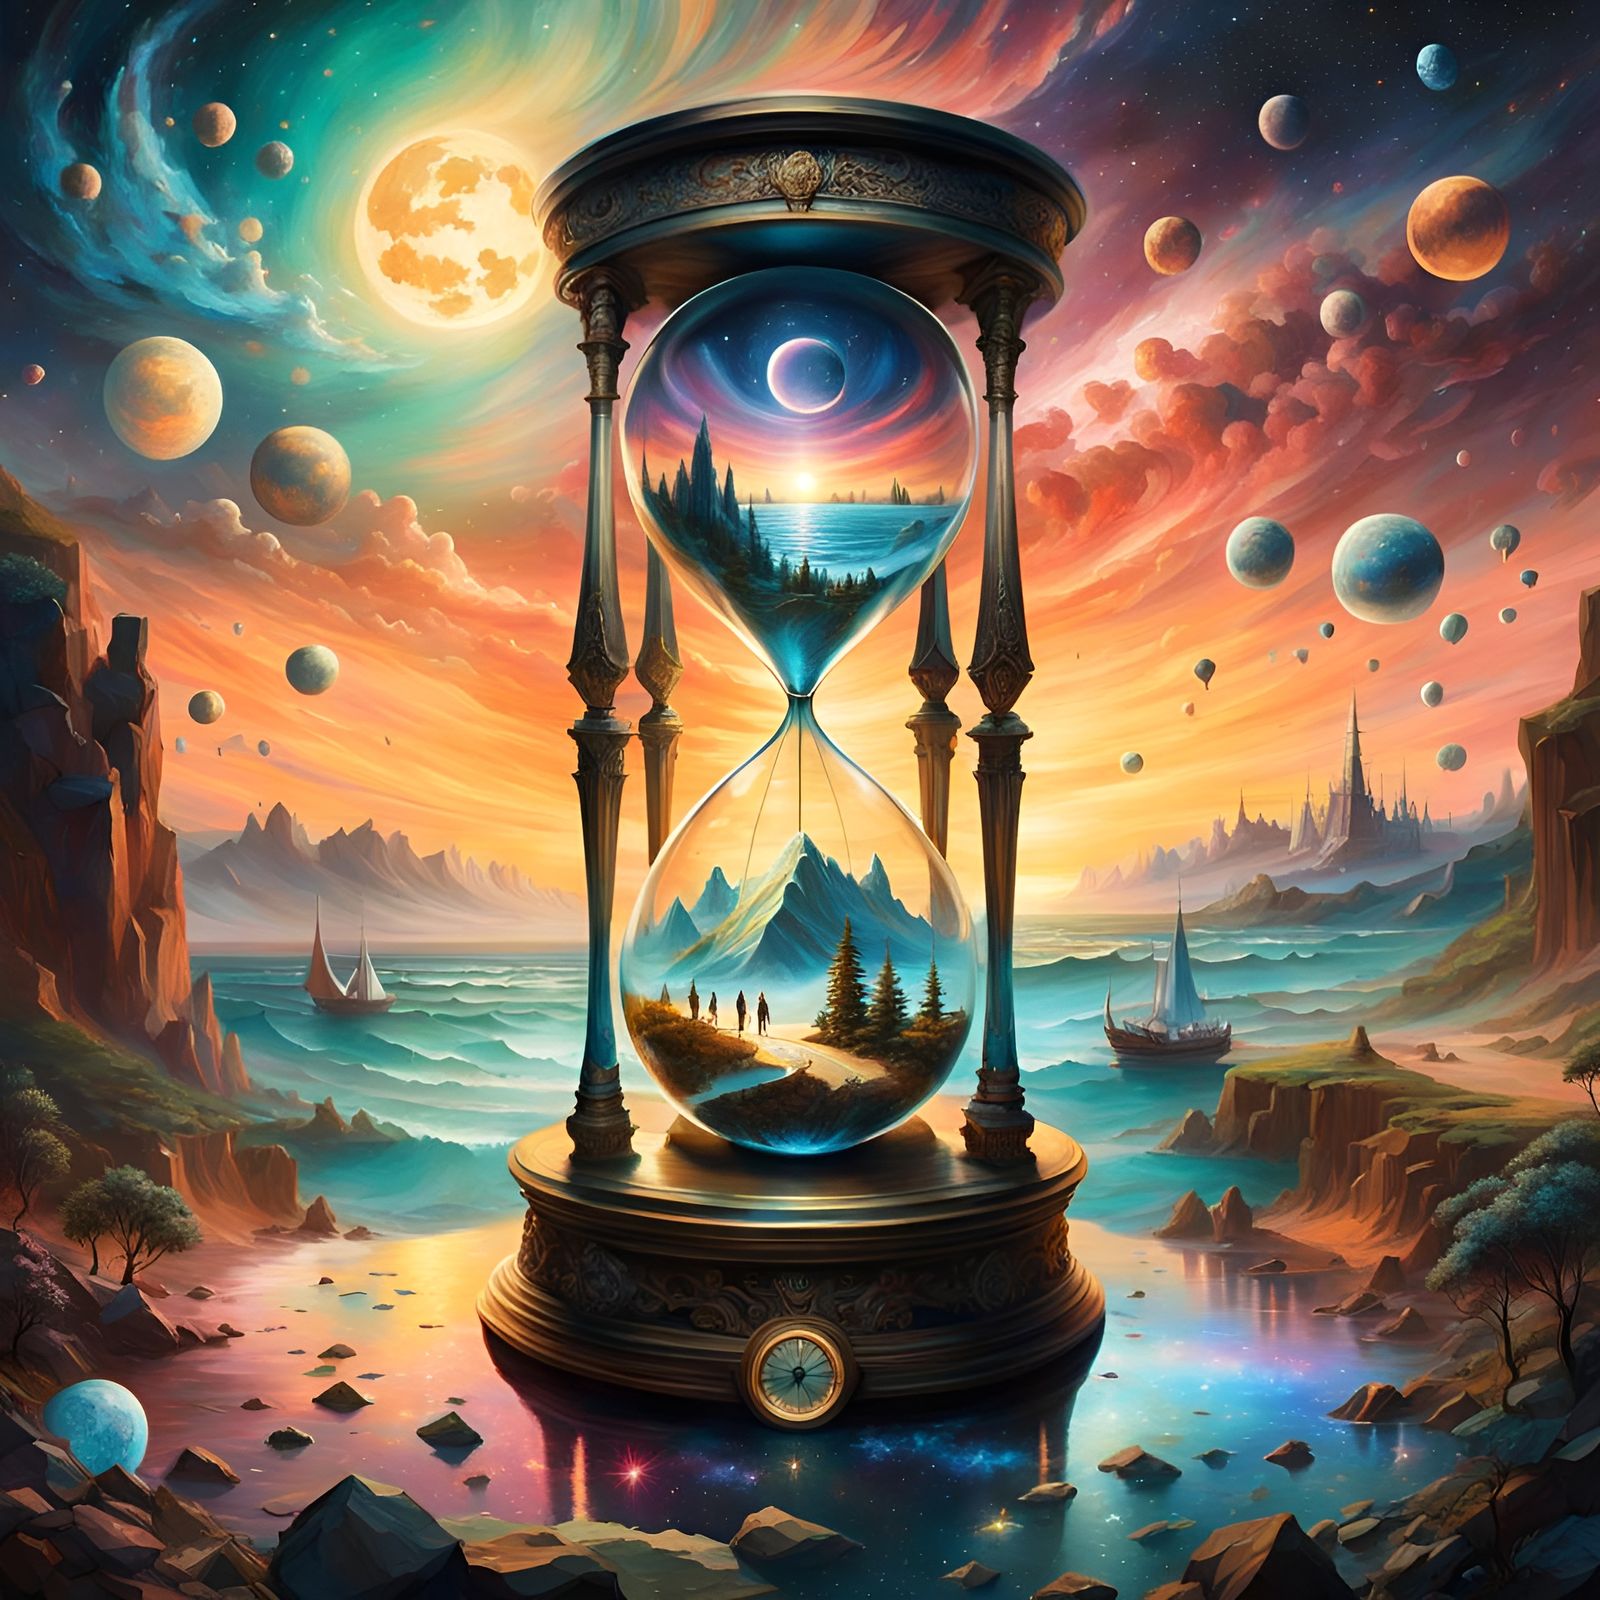 The illusion of time - life cycles